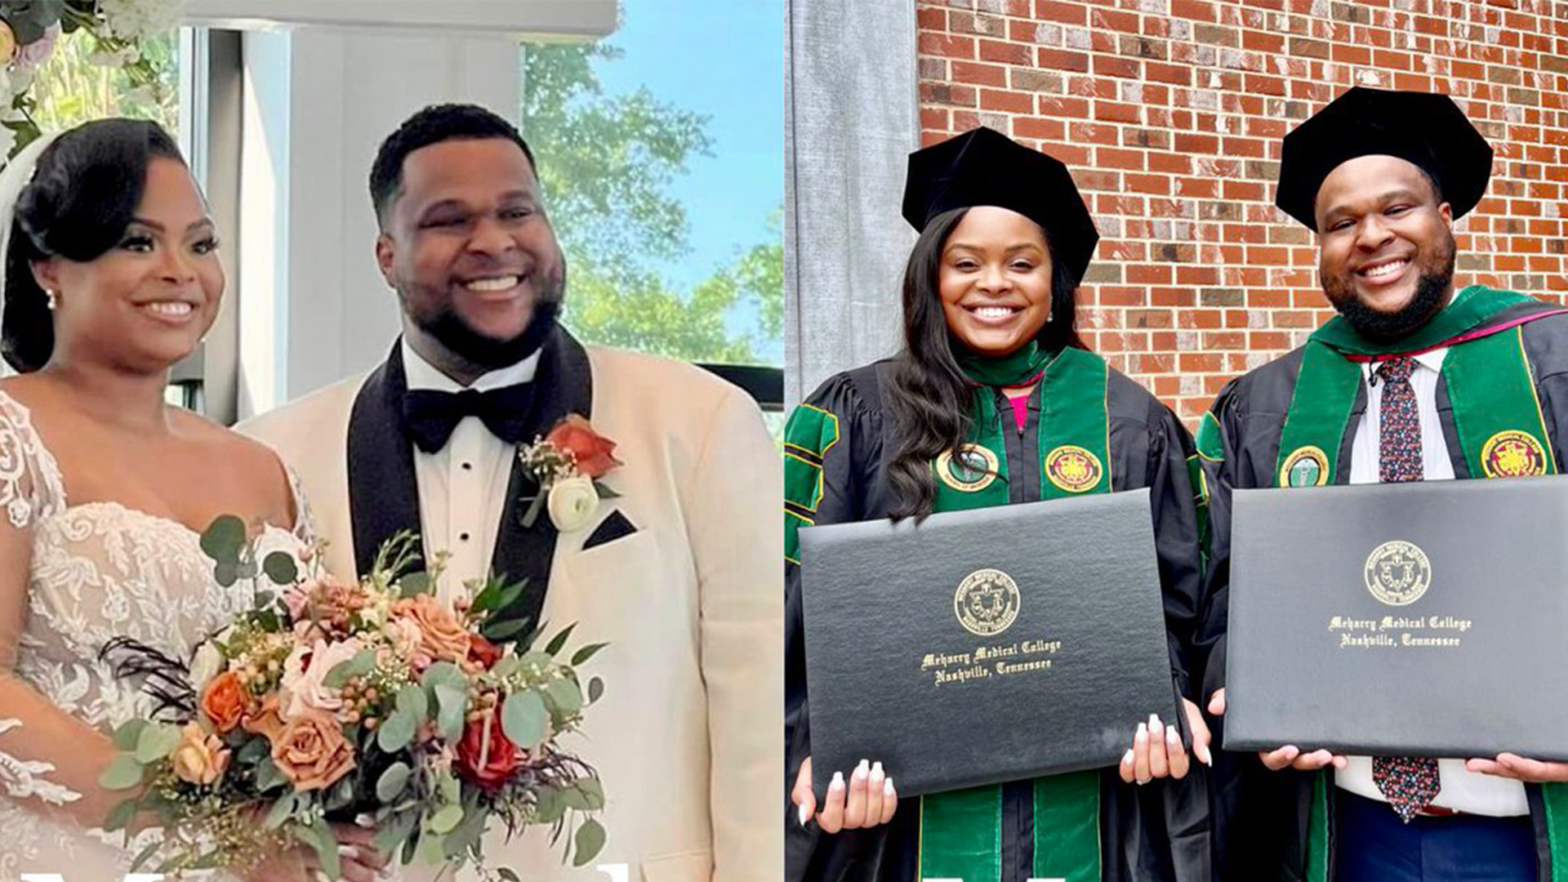 Black Couple Graduates From Medical School And Tie The Knot All In A Week's Time